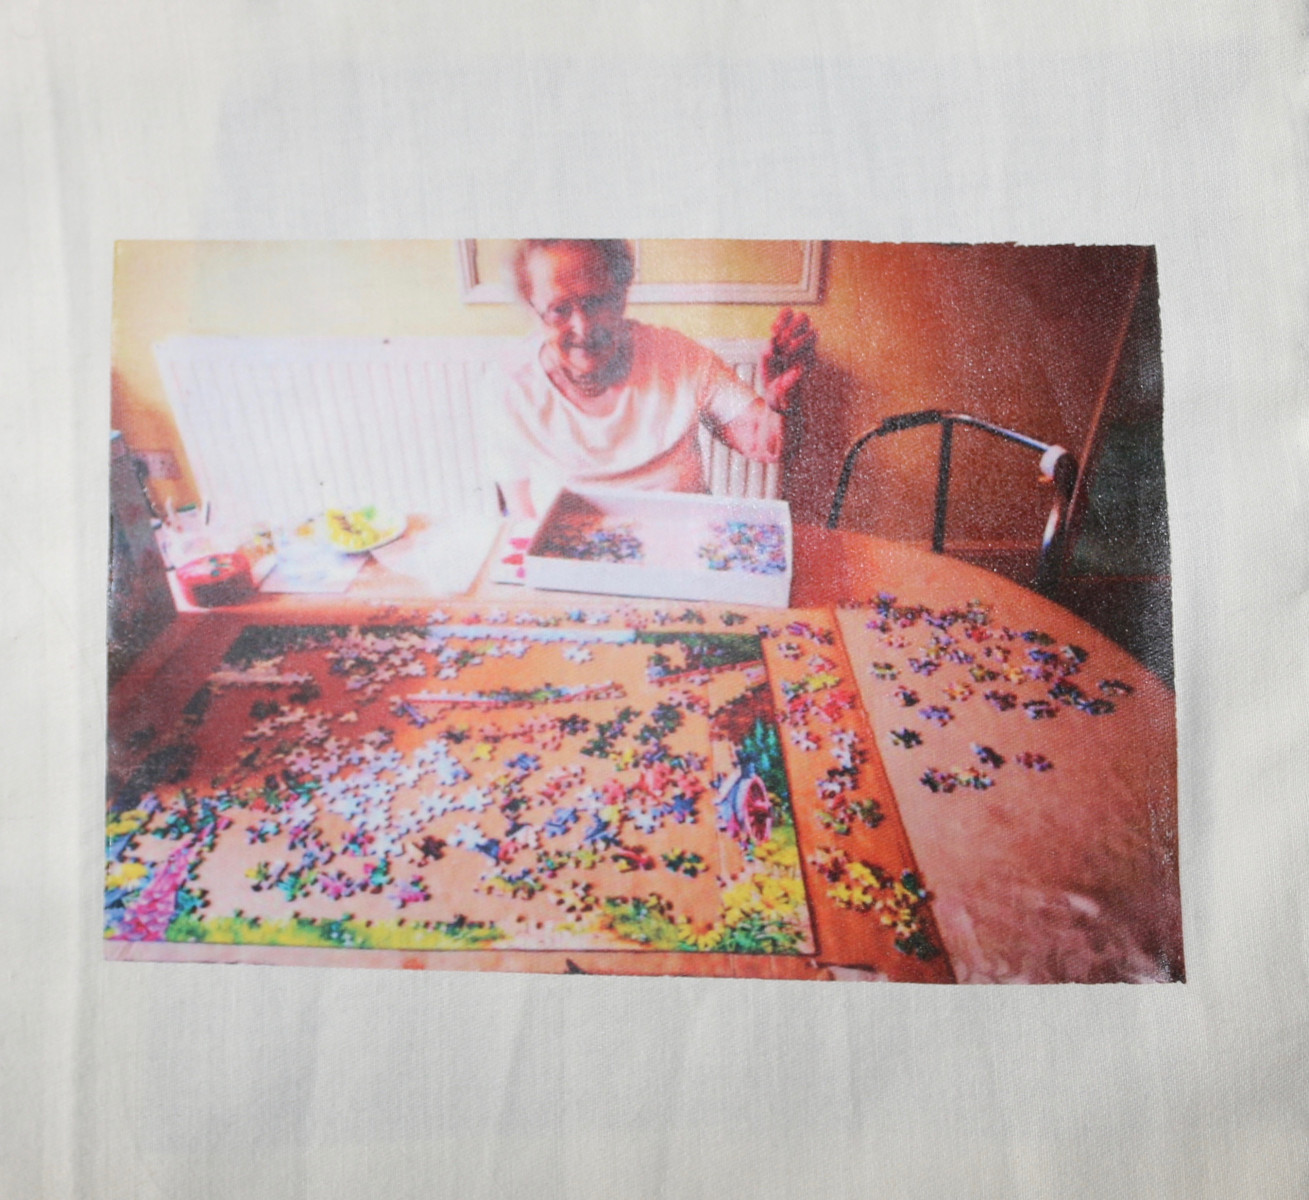 Image of person doing a jigsaw